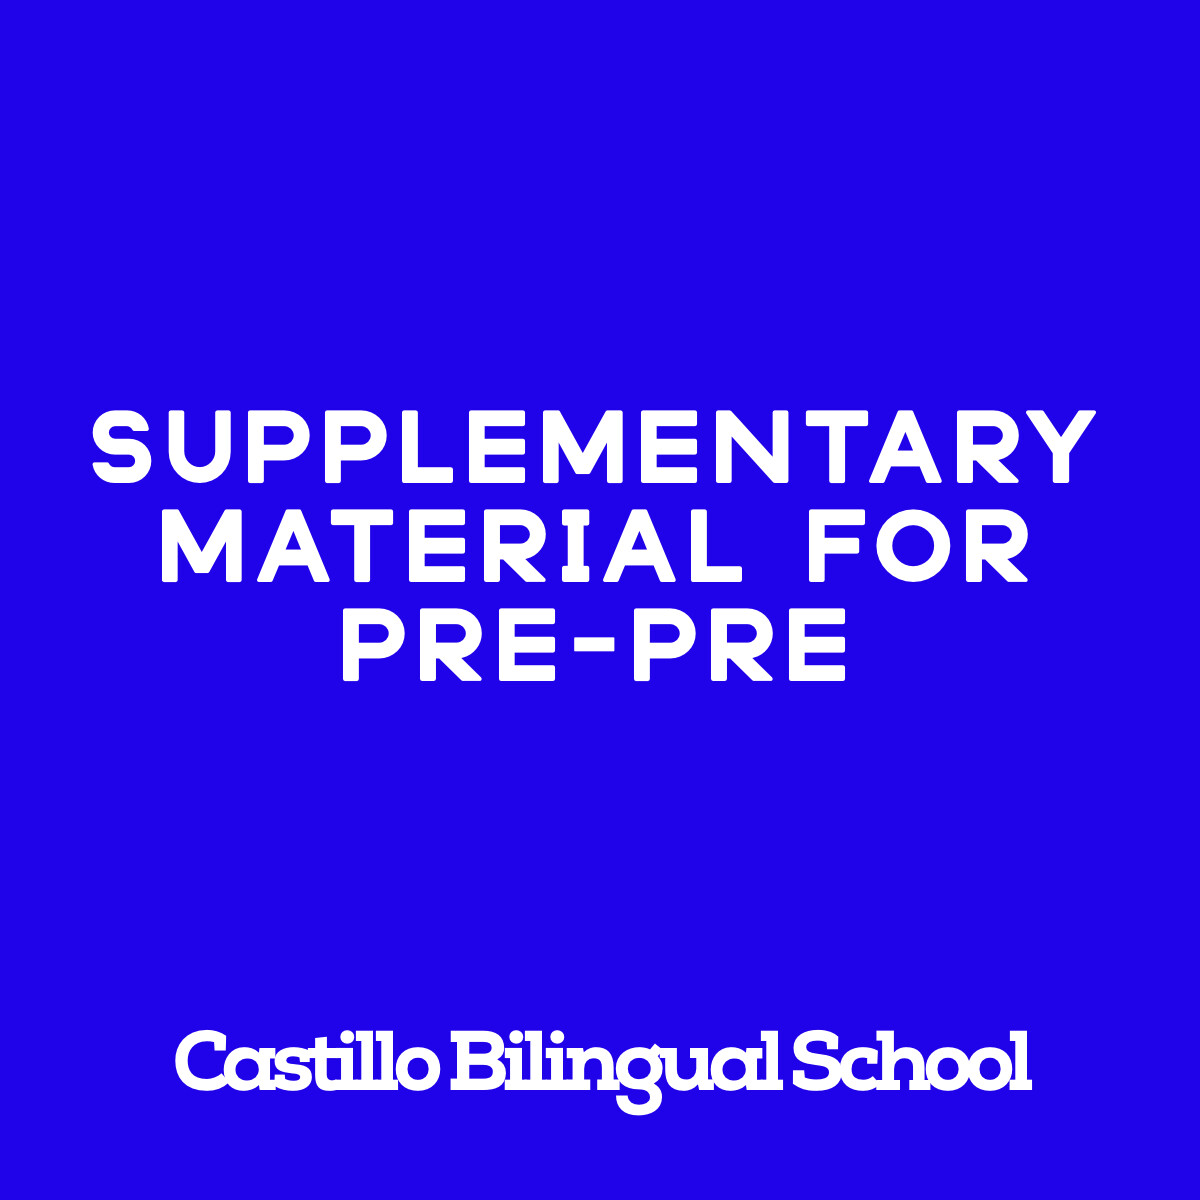 PRE-PRE - SUPPLEMENTARY MATERIAL FOR PRE-PRE - CBS - ISBN MAT-SUP-PP